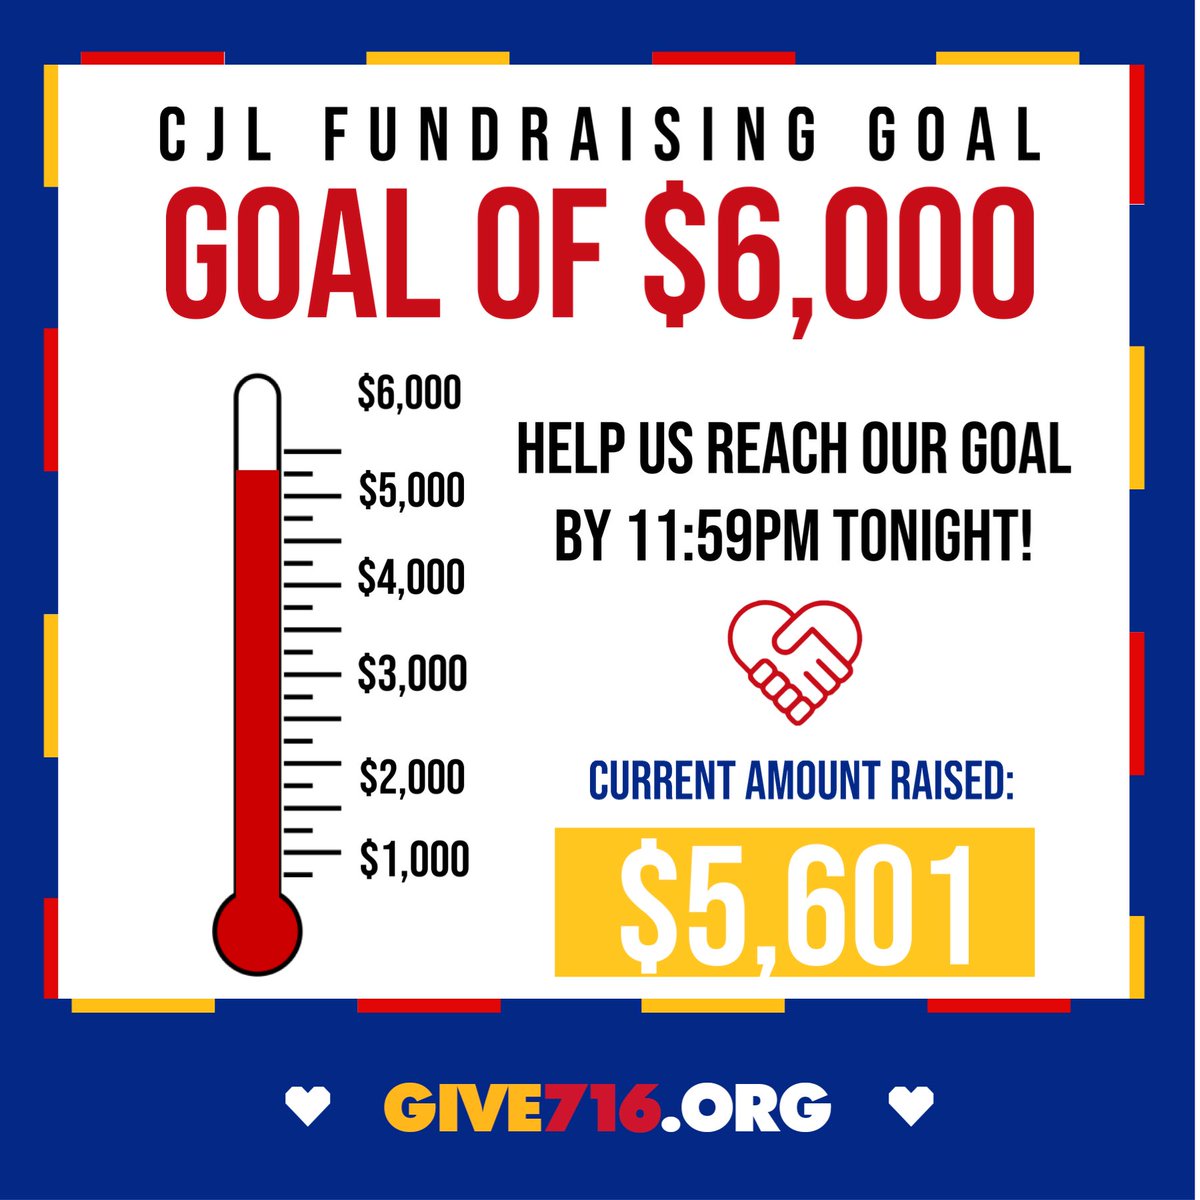 Help The CJL Foundation reach their goal, donate now if you can! @CJLFoundation #give716